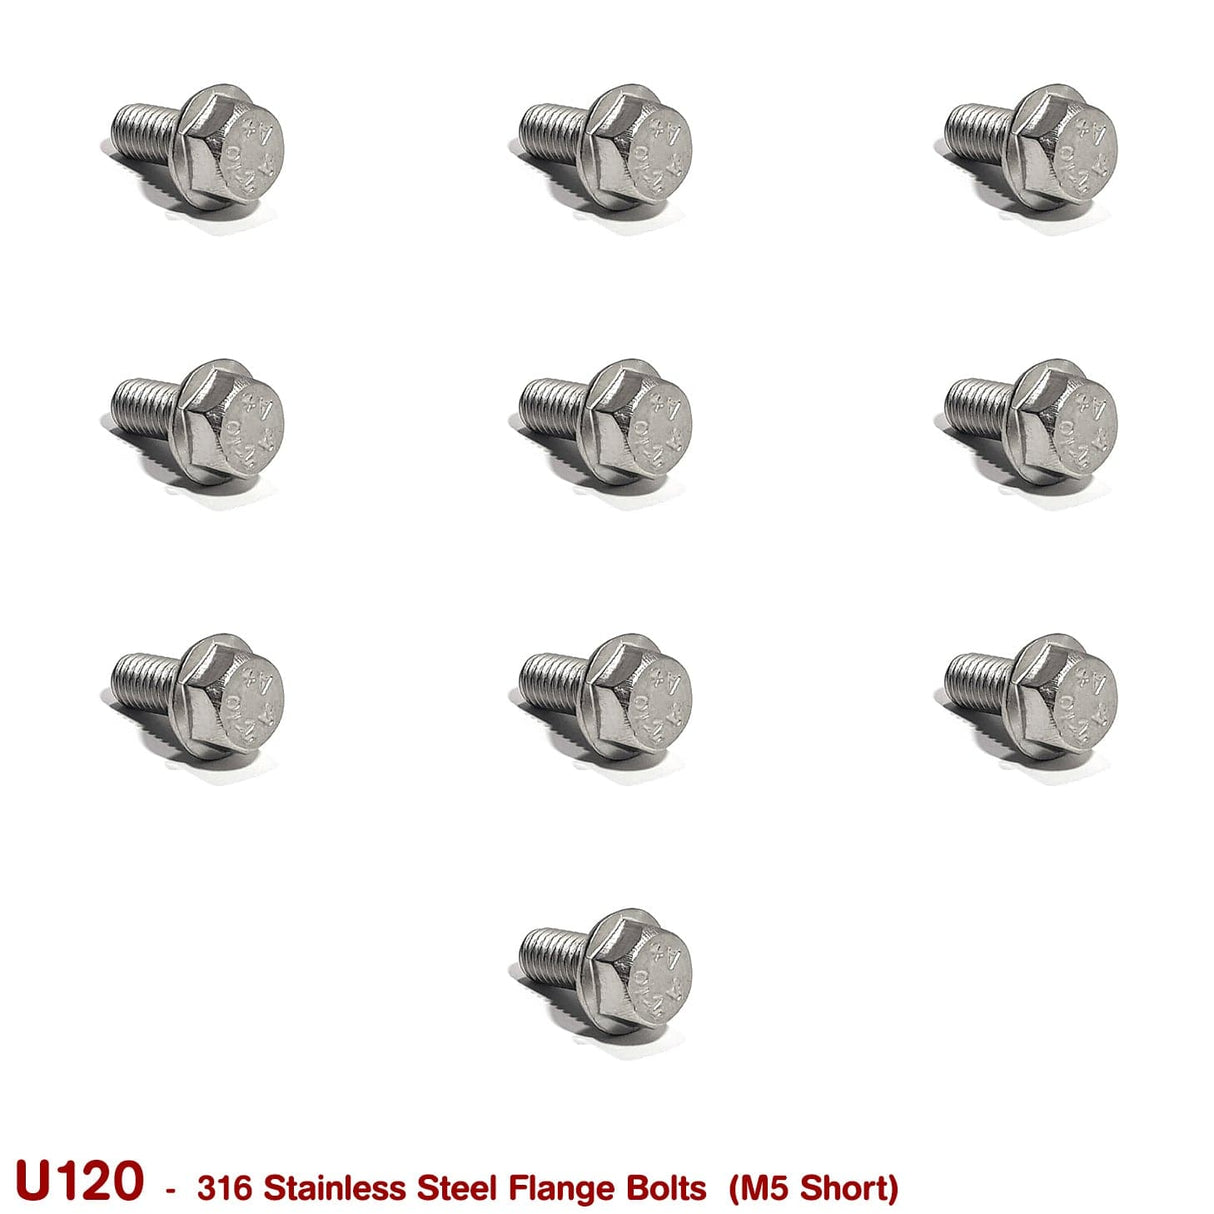 FLANGE BOLTS M5 SMALL (316 STAINLESS STEEL) - HOLDCOM AUTO PARTS